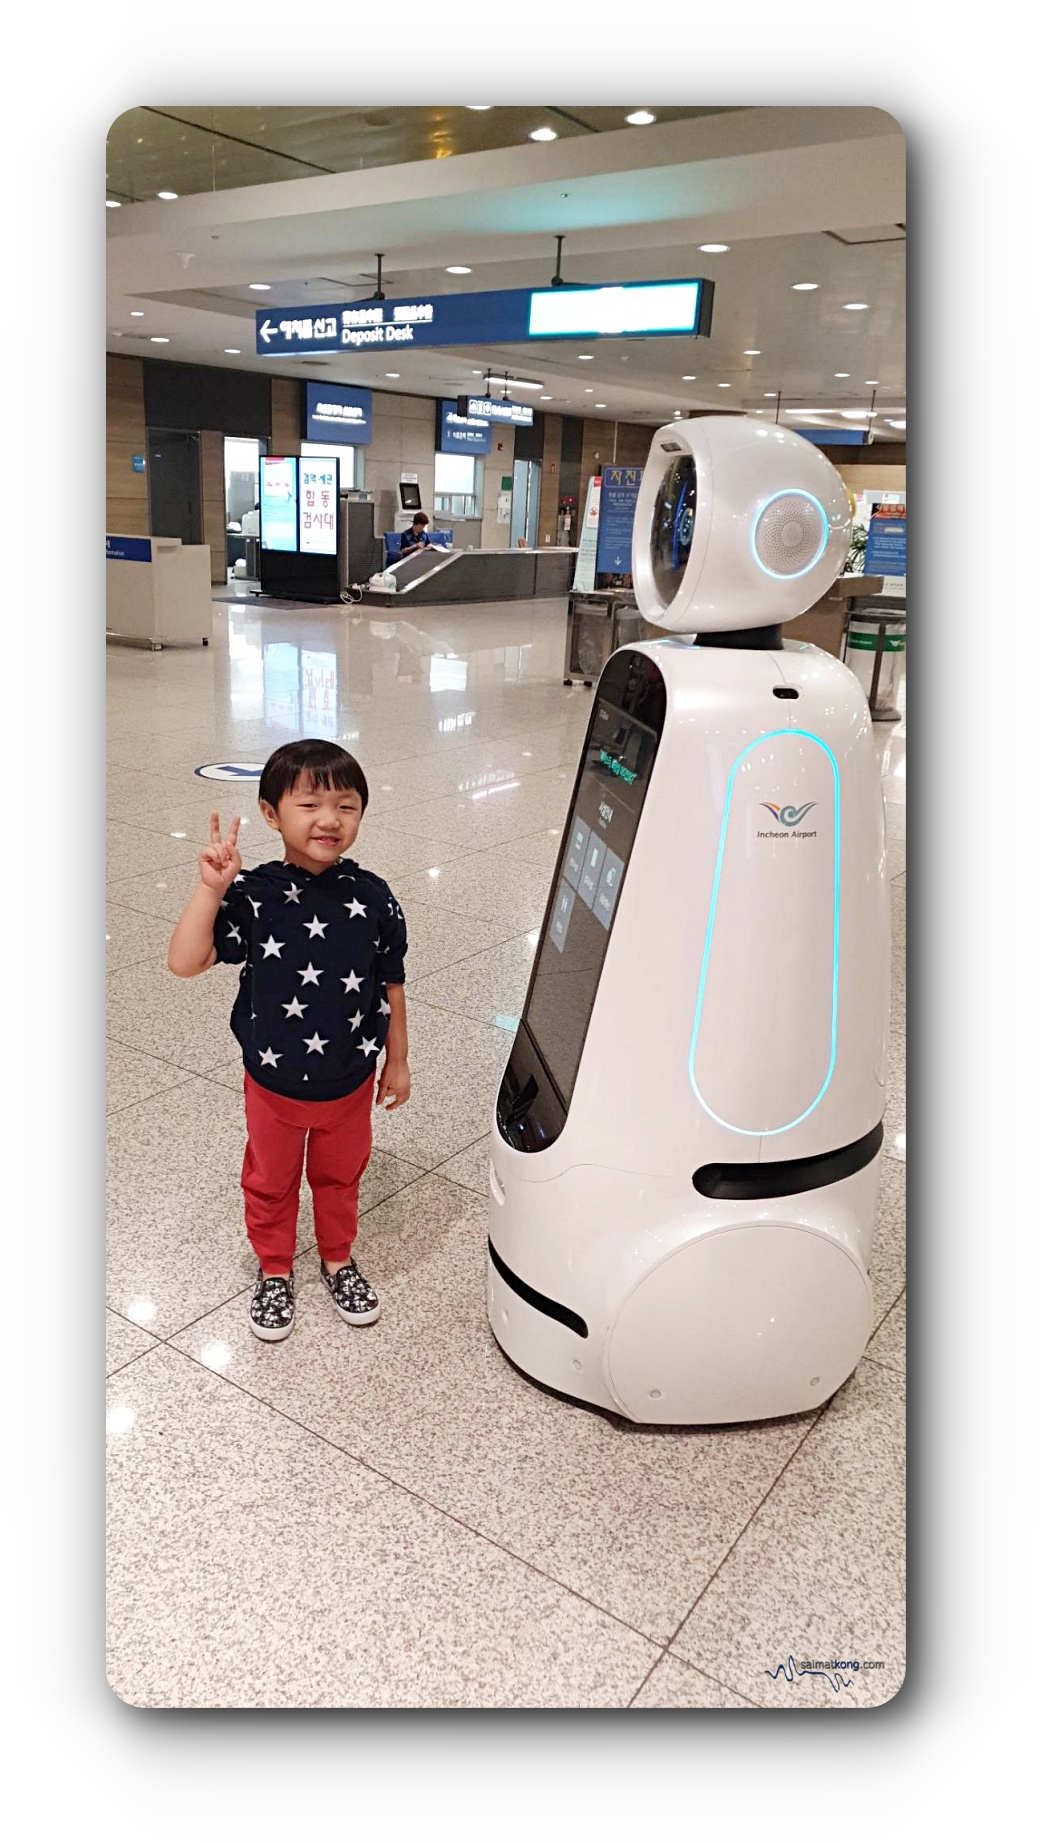 Seoul Trip 2019 Awesome Summer in Seoul - Annyeonghaseyo. Greeted by “AIRSTAR”; an airport robot guide upon landing in Seoul Incheon International Airport.